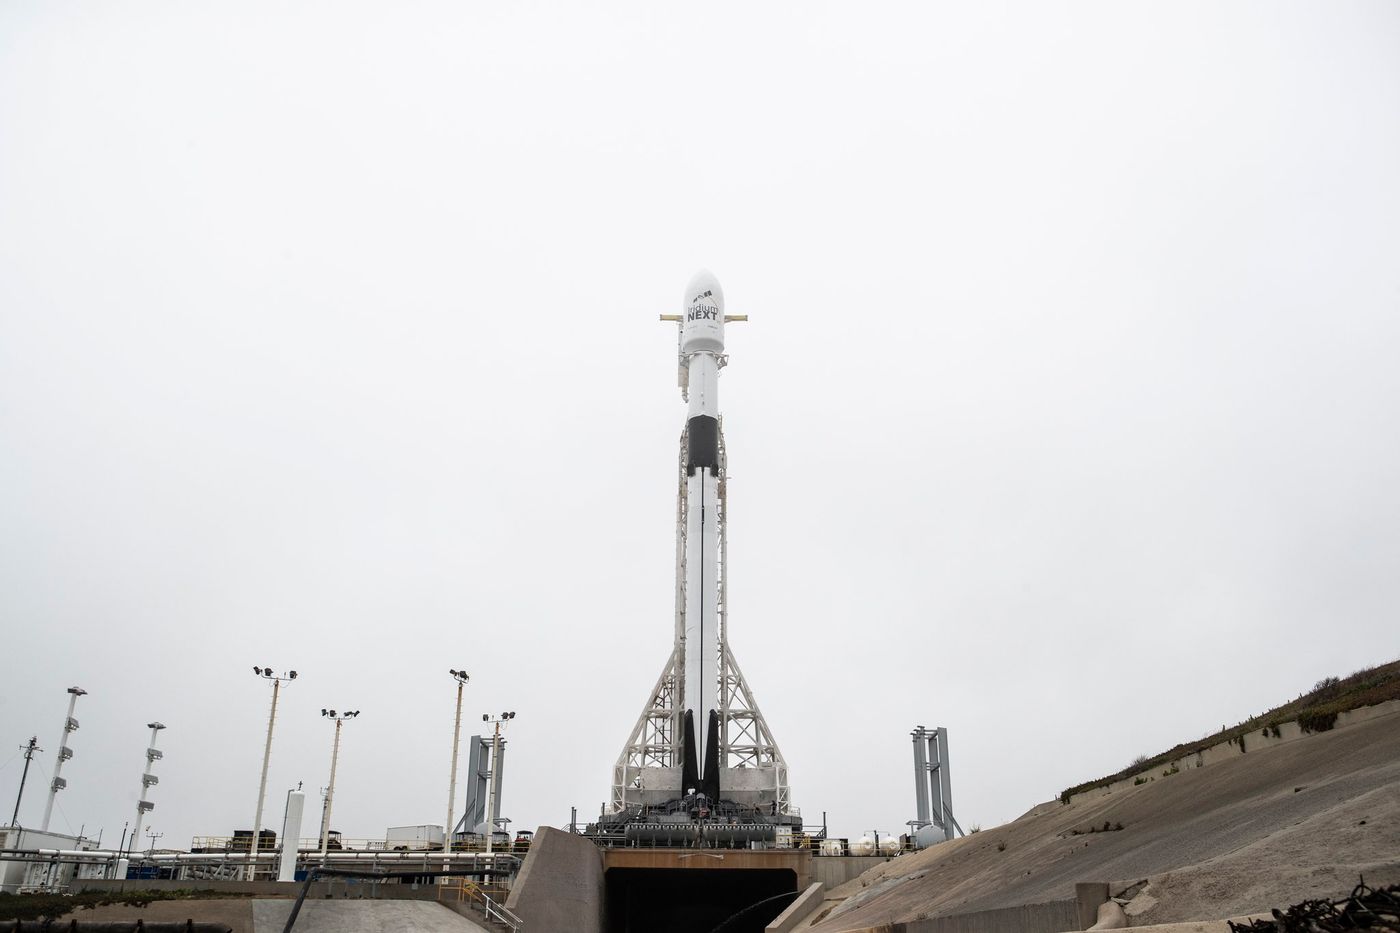 A look at SpaceX's upright Falcon 9 rocket just before launch on Wednesday.